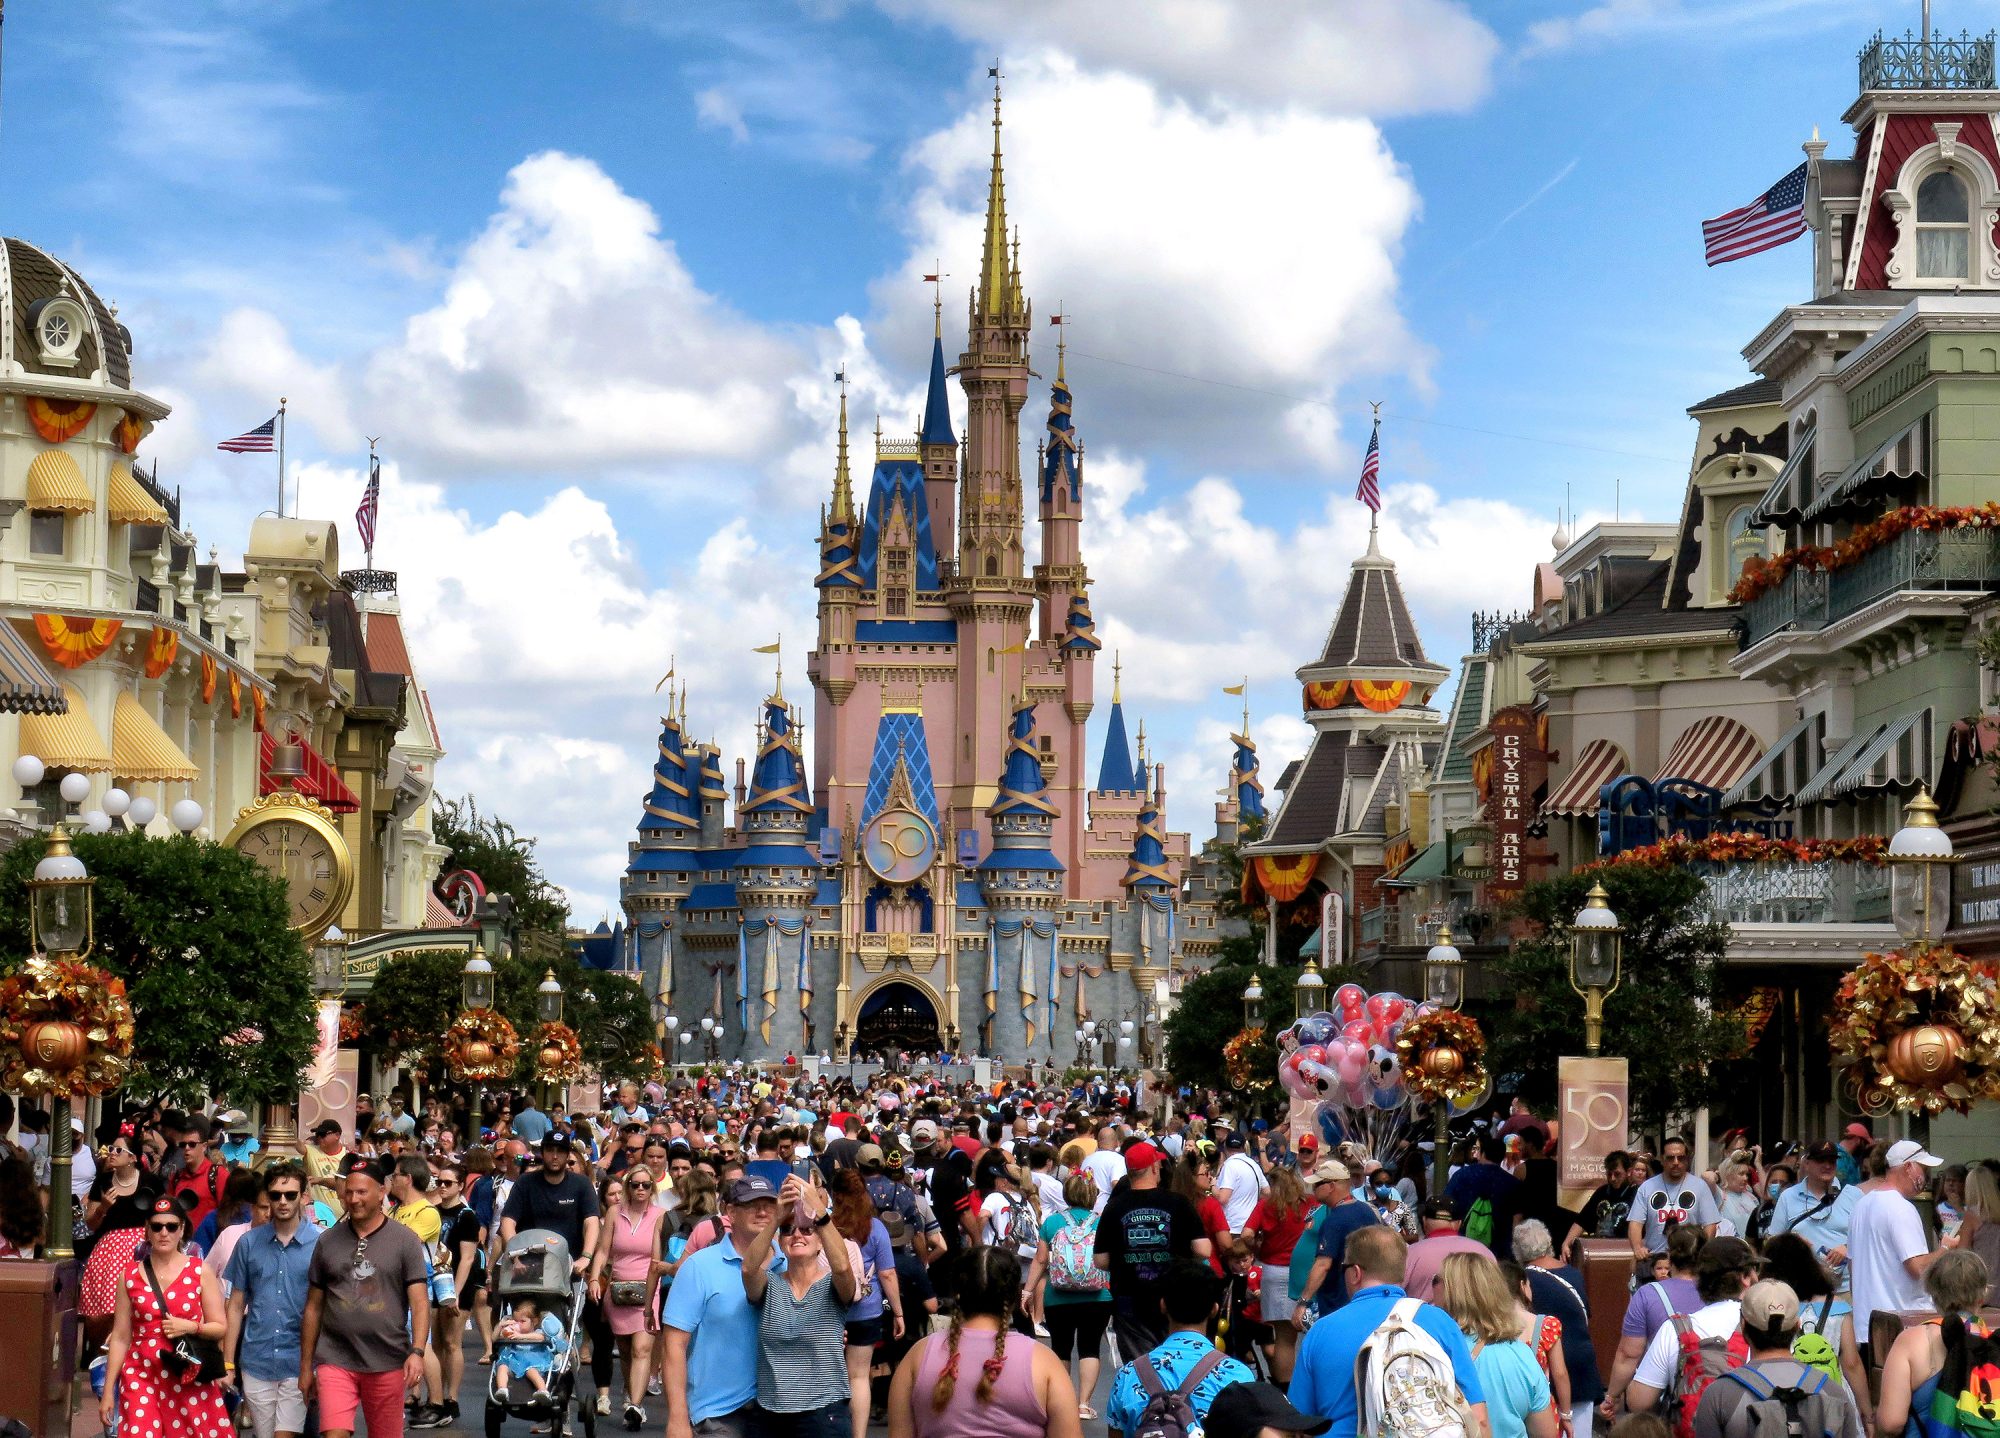 Main Street USA at Disney World filled with crowds with Cinderella's Castle in the background